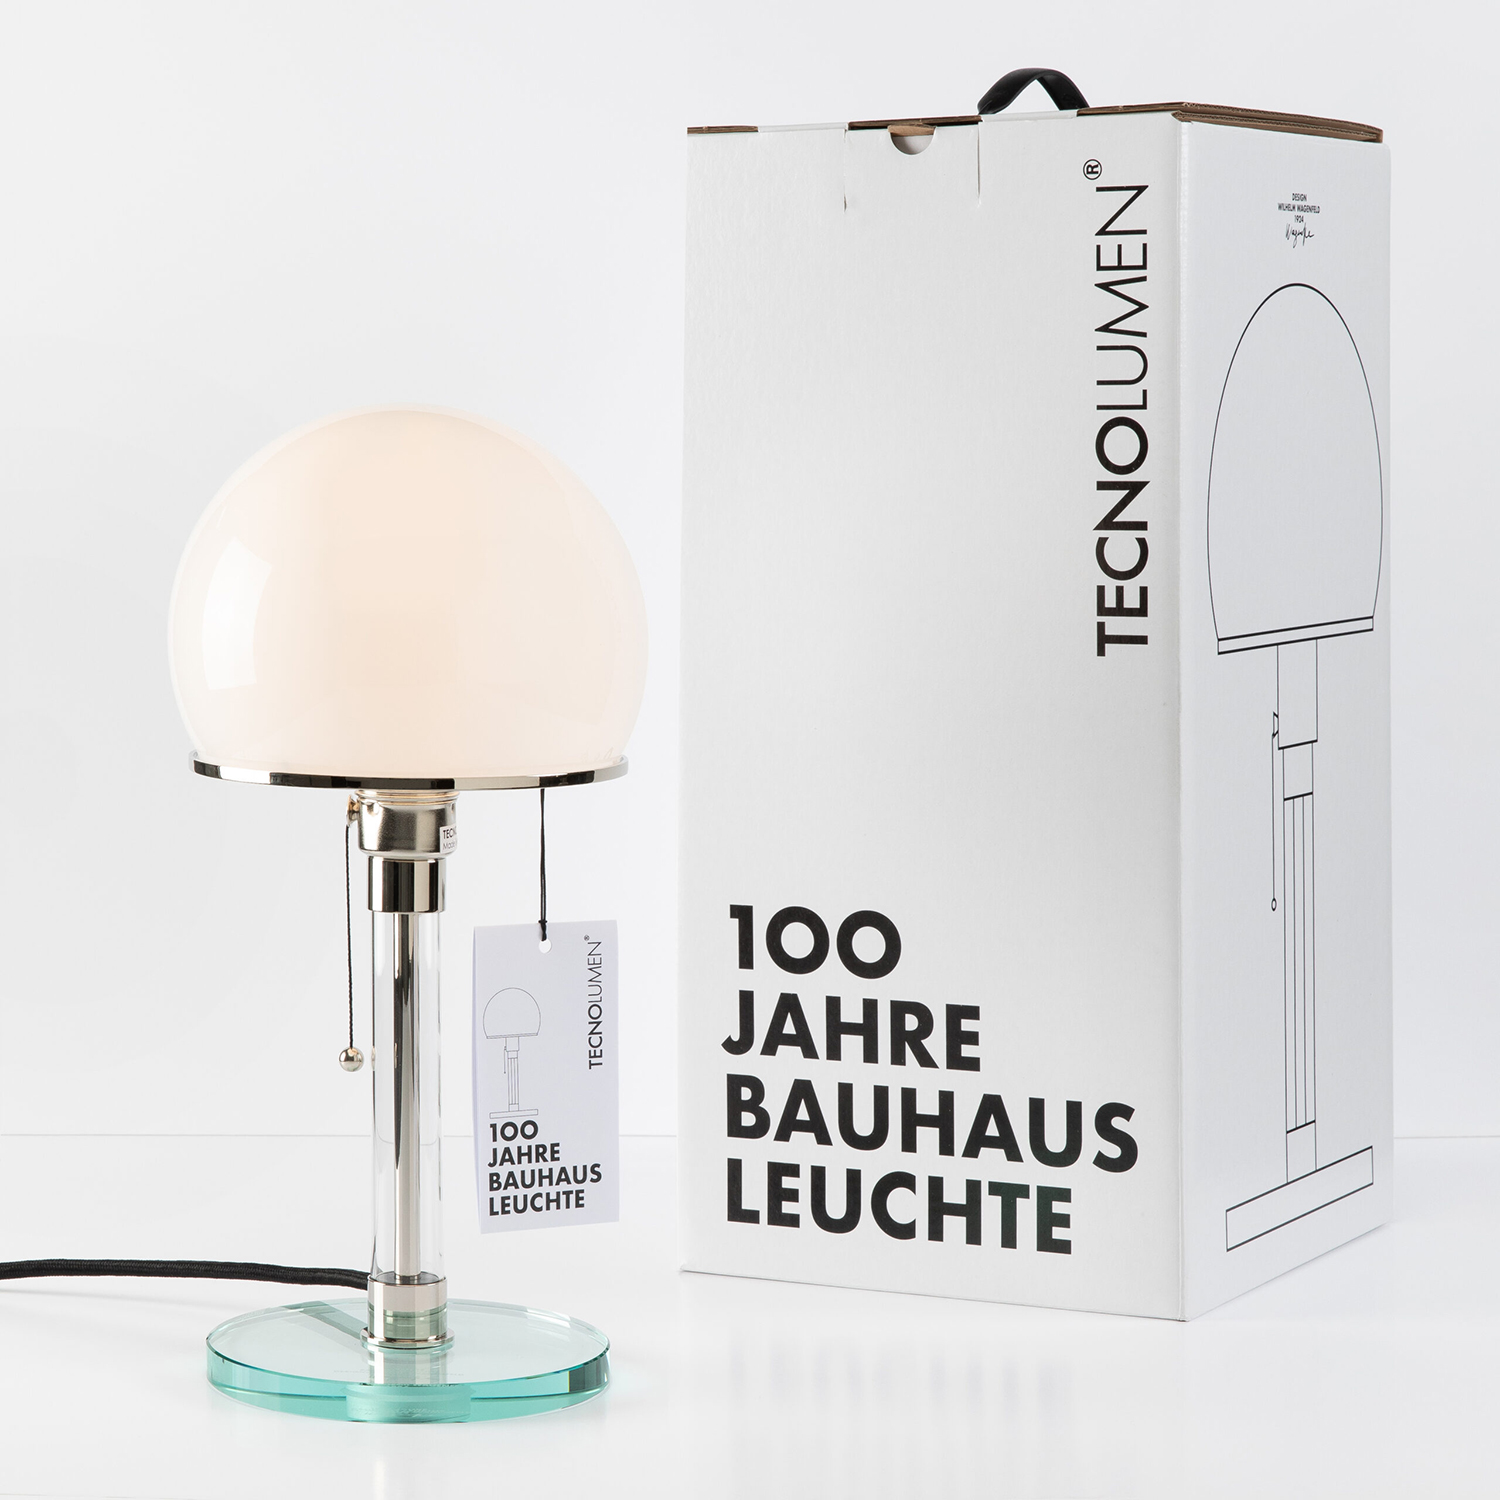 Picture of Wilhelm Wagenfeld Bauhaus lamp WG 24 / 100 Years Special Edition